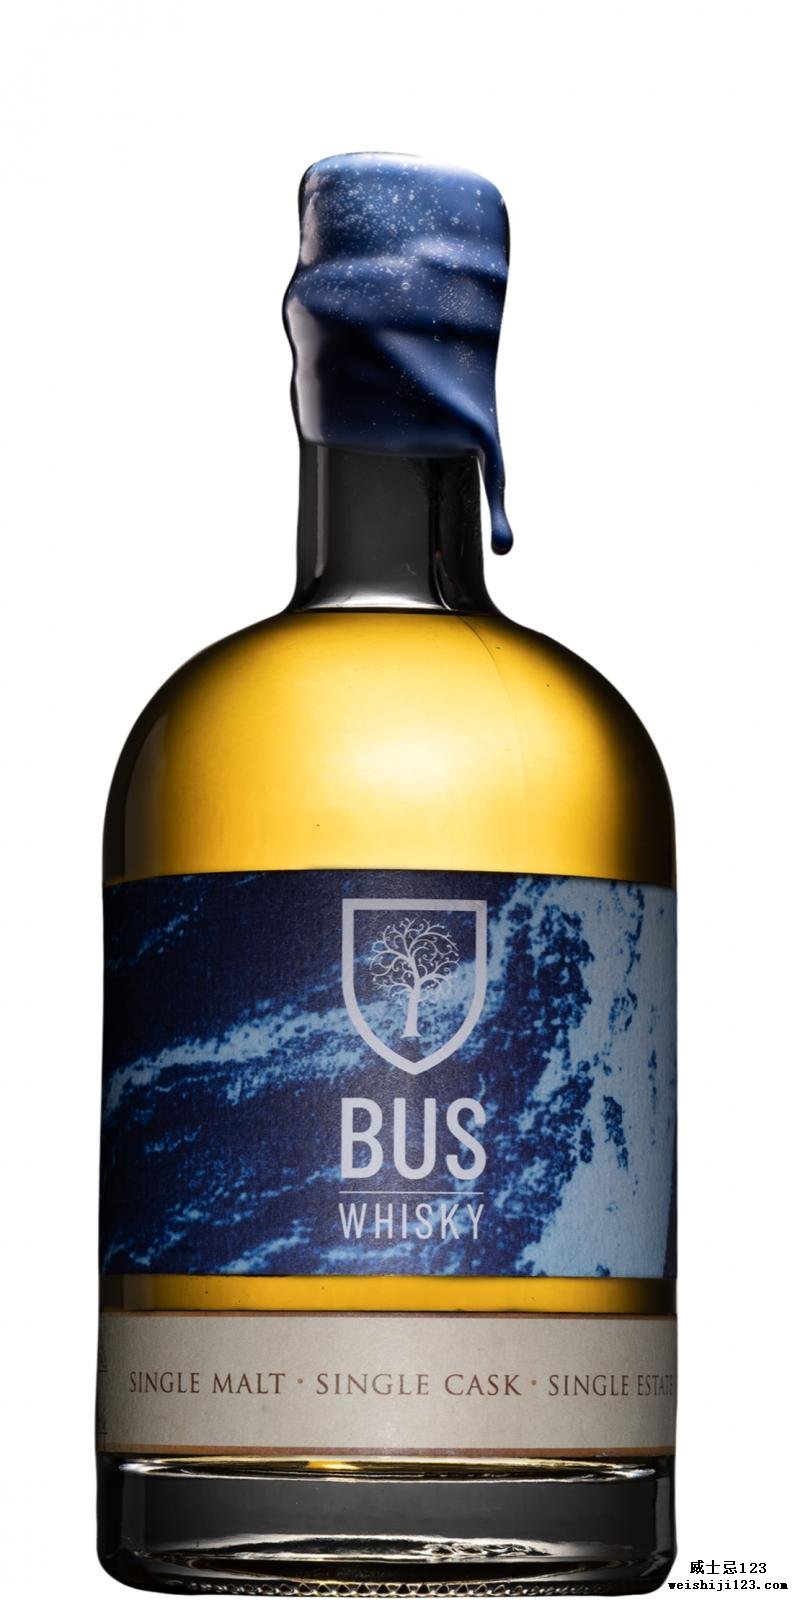 Bus Whisky 2018